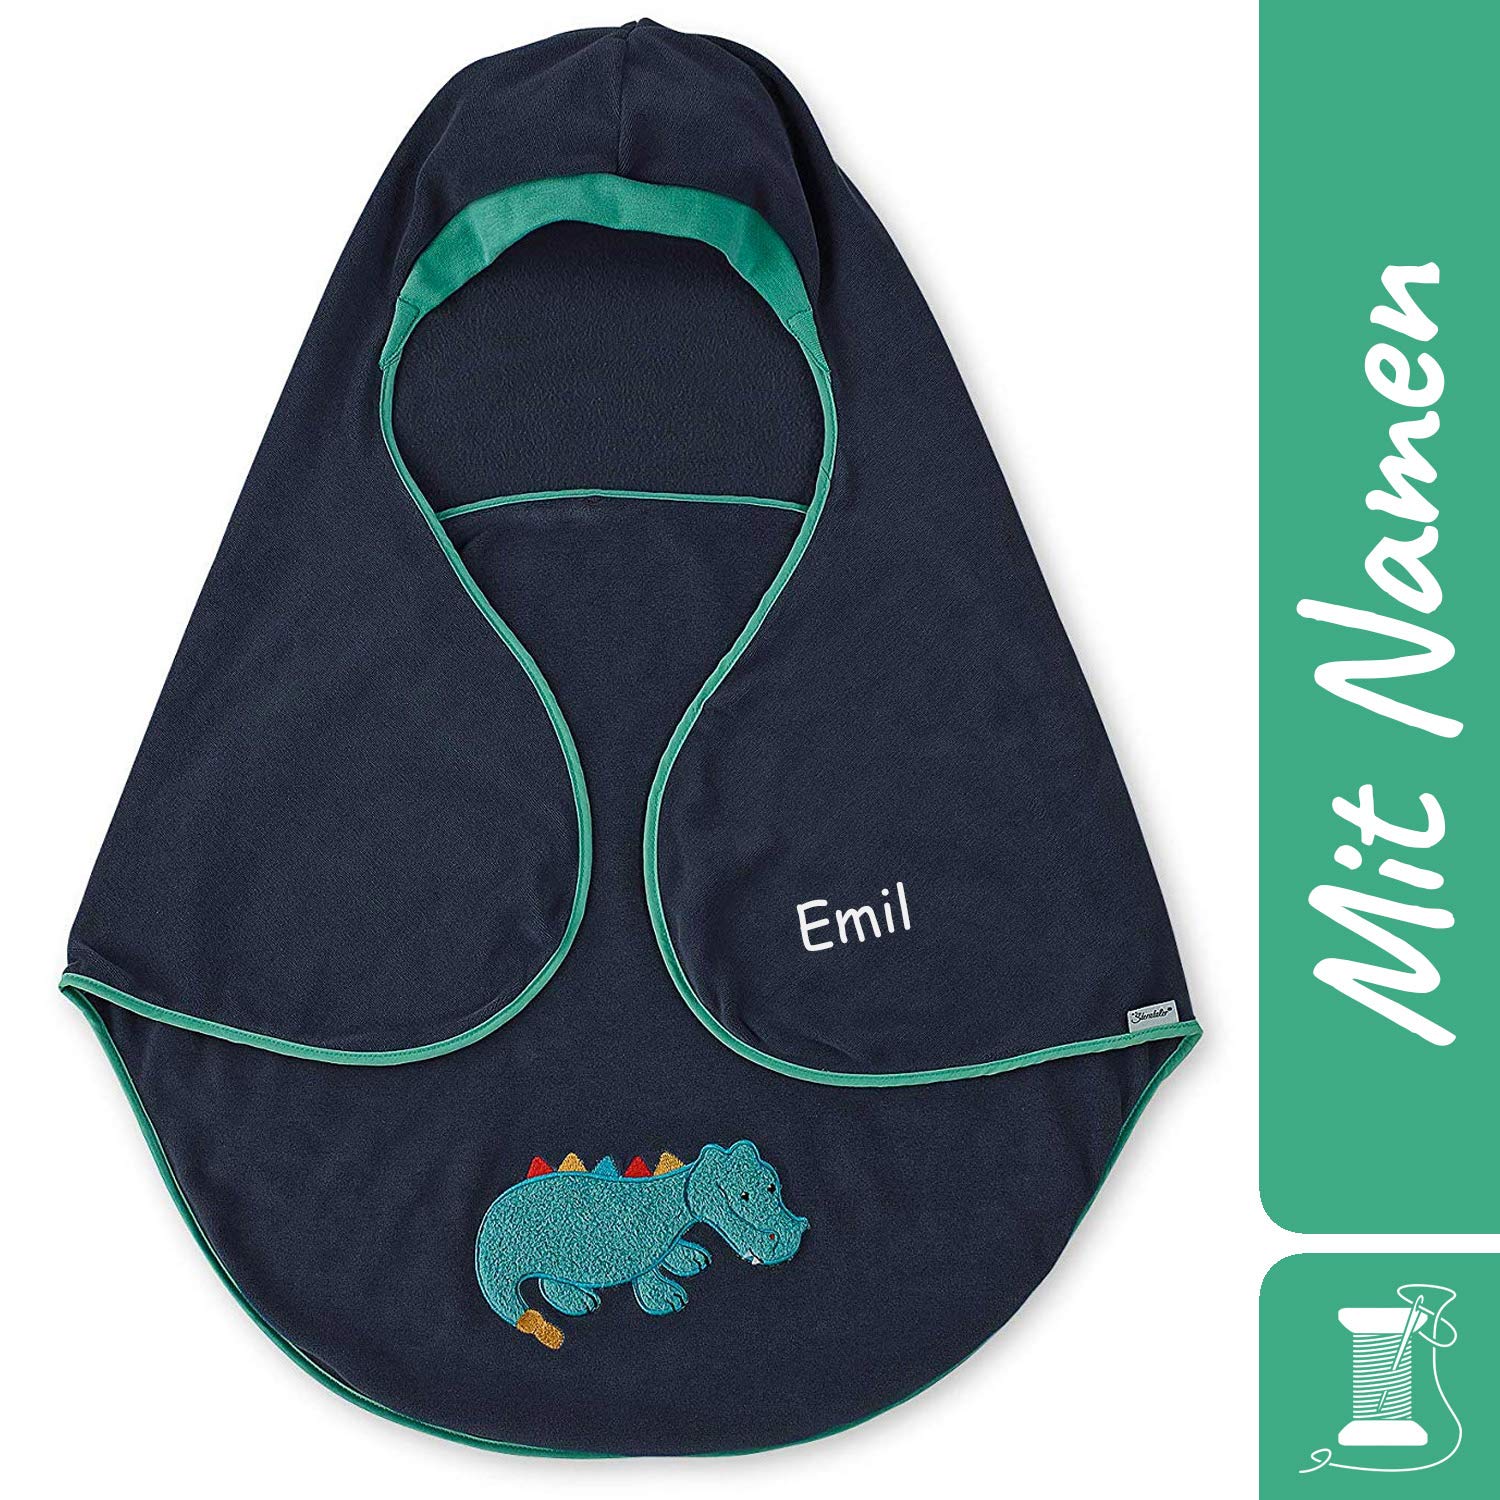 Sterntaler Baby Swaddling Blanket with Name, Universal for Baby Seat, Car Seat, e.g. for Maxi-Cosi, Cybex, Kiddy, Römer, for Pram, Buggy or Baby Cot, Cuddly Zoo Crocodile Dark Blue/Green Boy